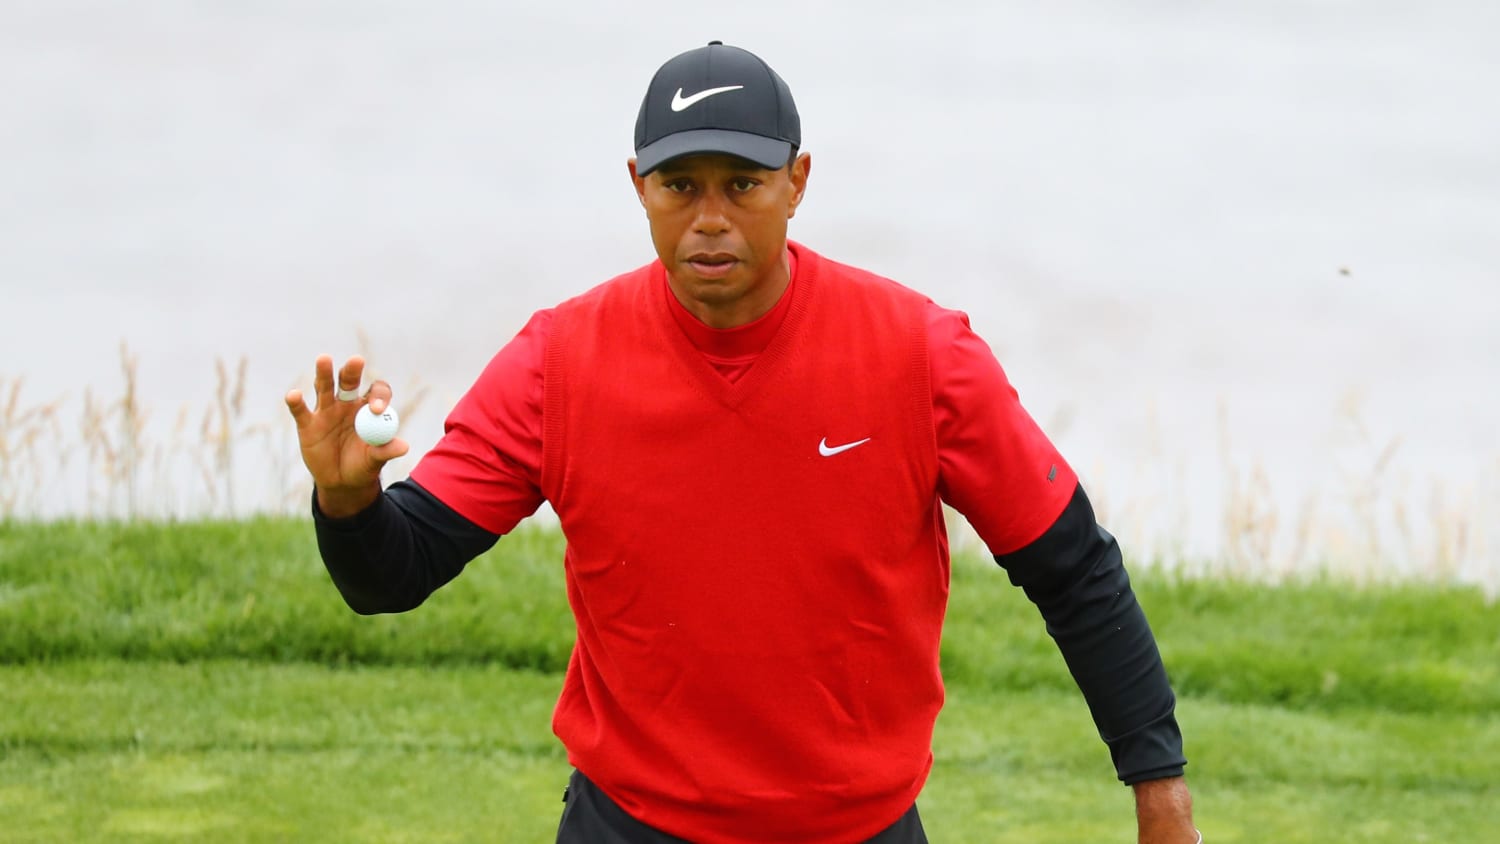 Tiger Woods fights off another 'crappy' start, finishes on a high note at U.S. Open